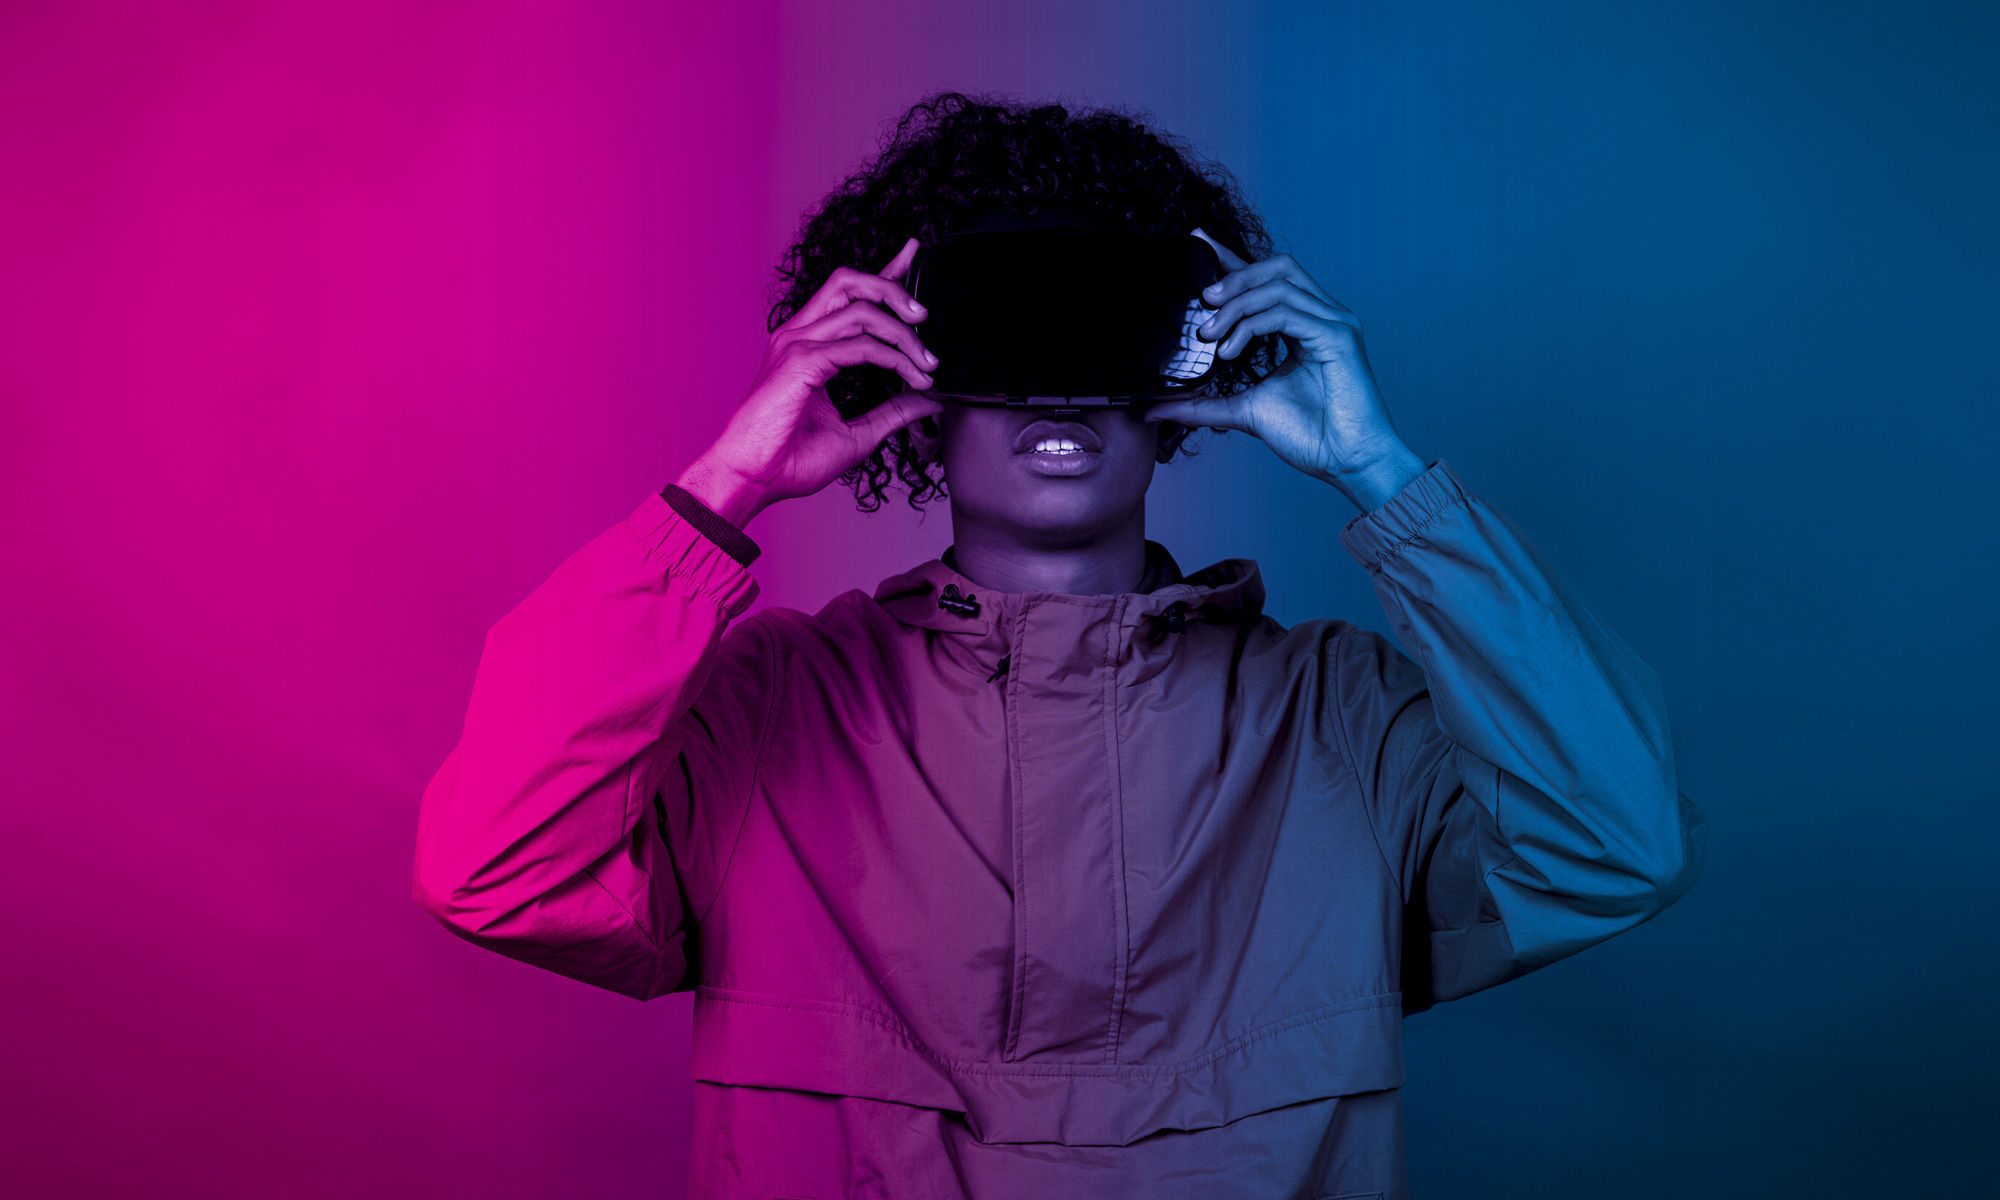 A young African male with VR glasses standing under the blue and purple lights